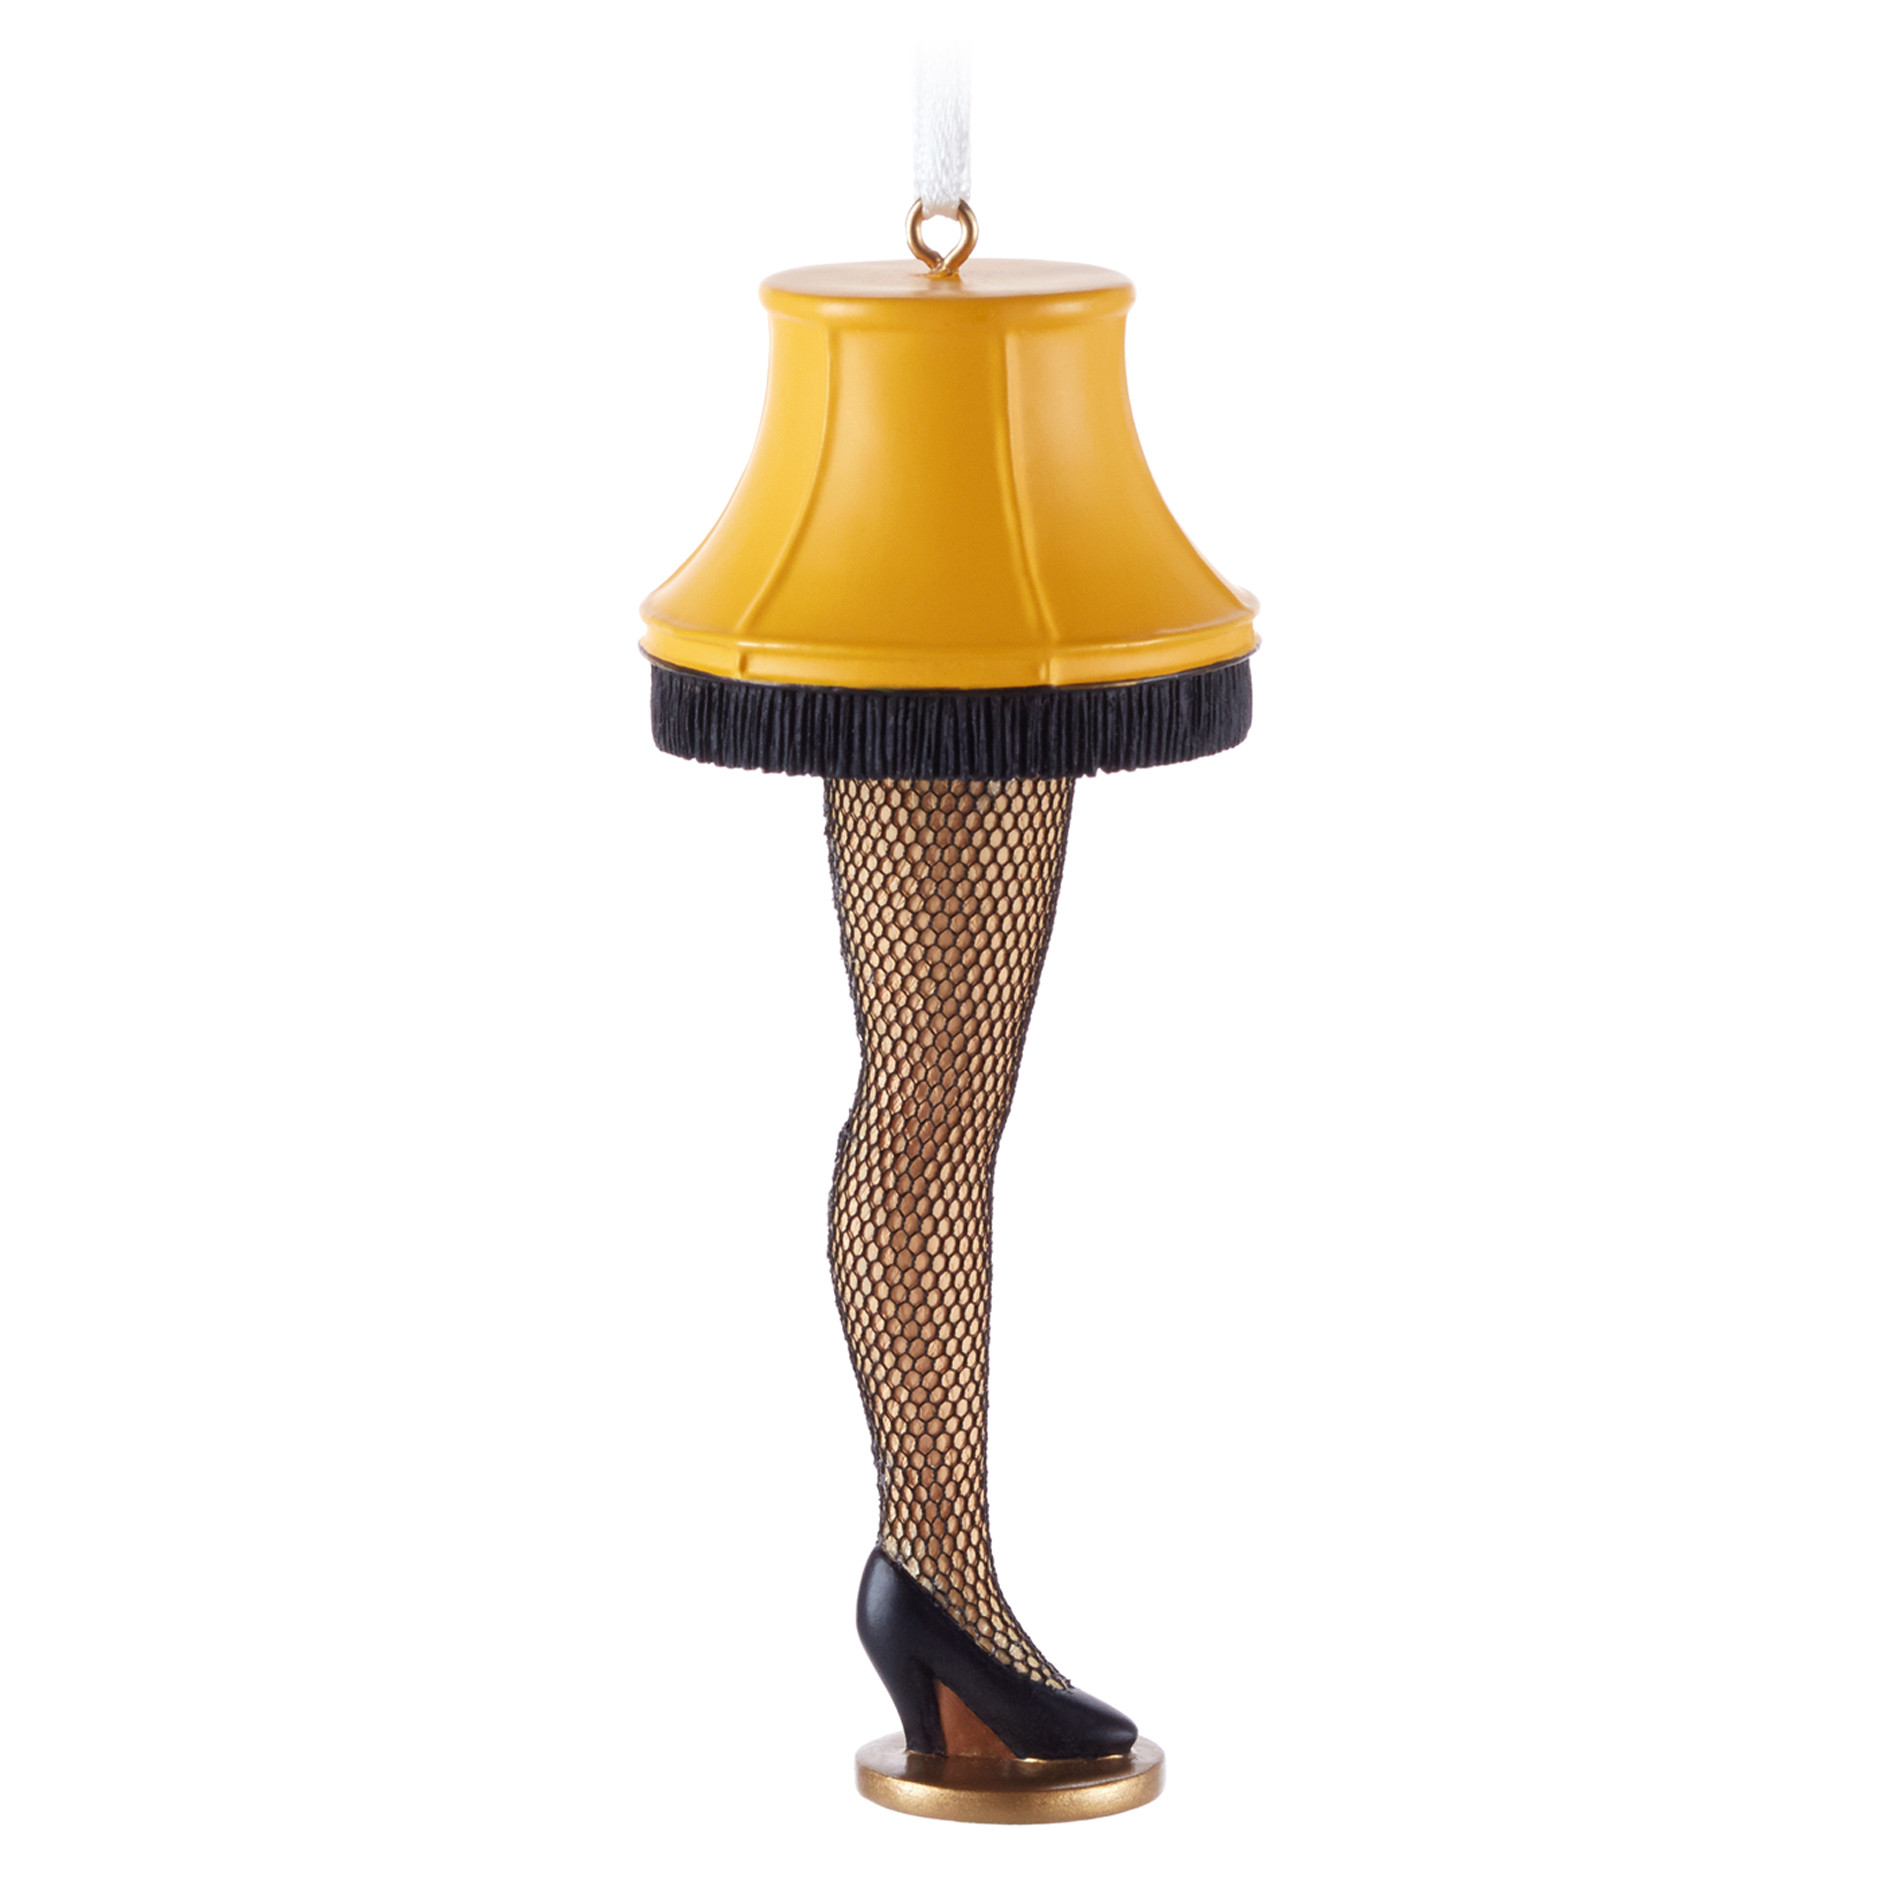 Christmas Story Lamp Ornament
 Warner Brothers A Christmas Story Leg Lamp Christmas Ornament